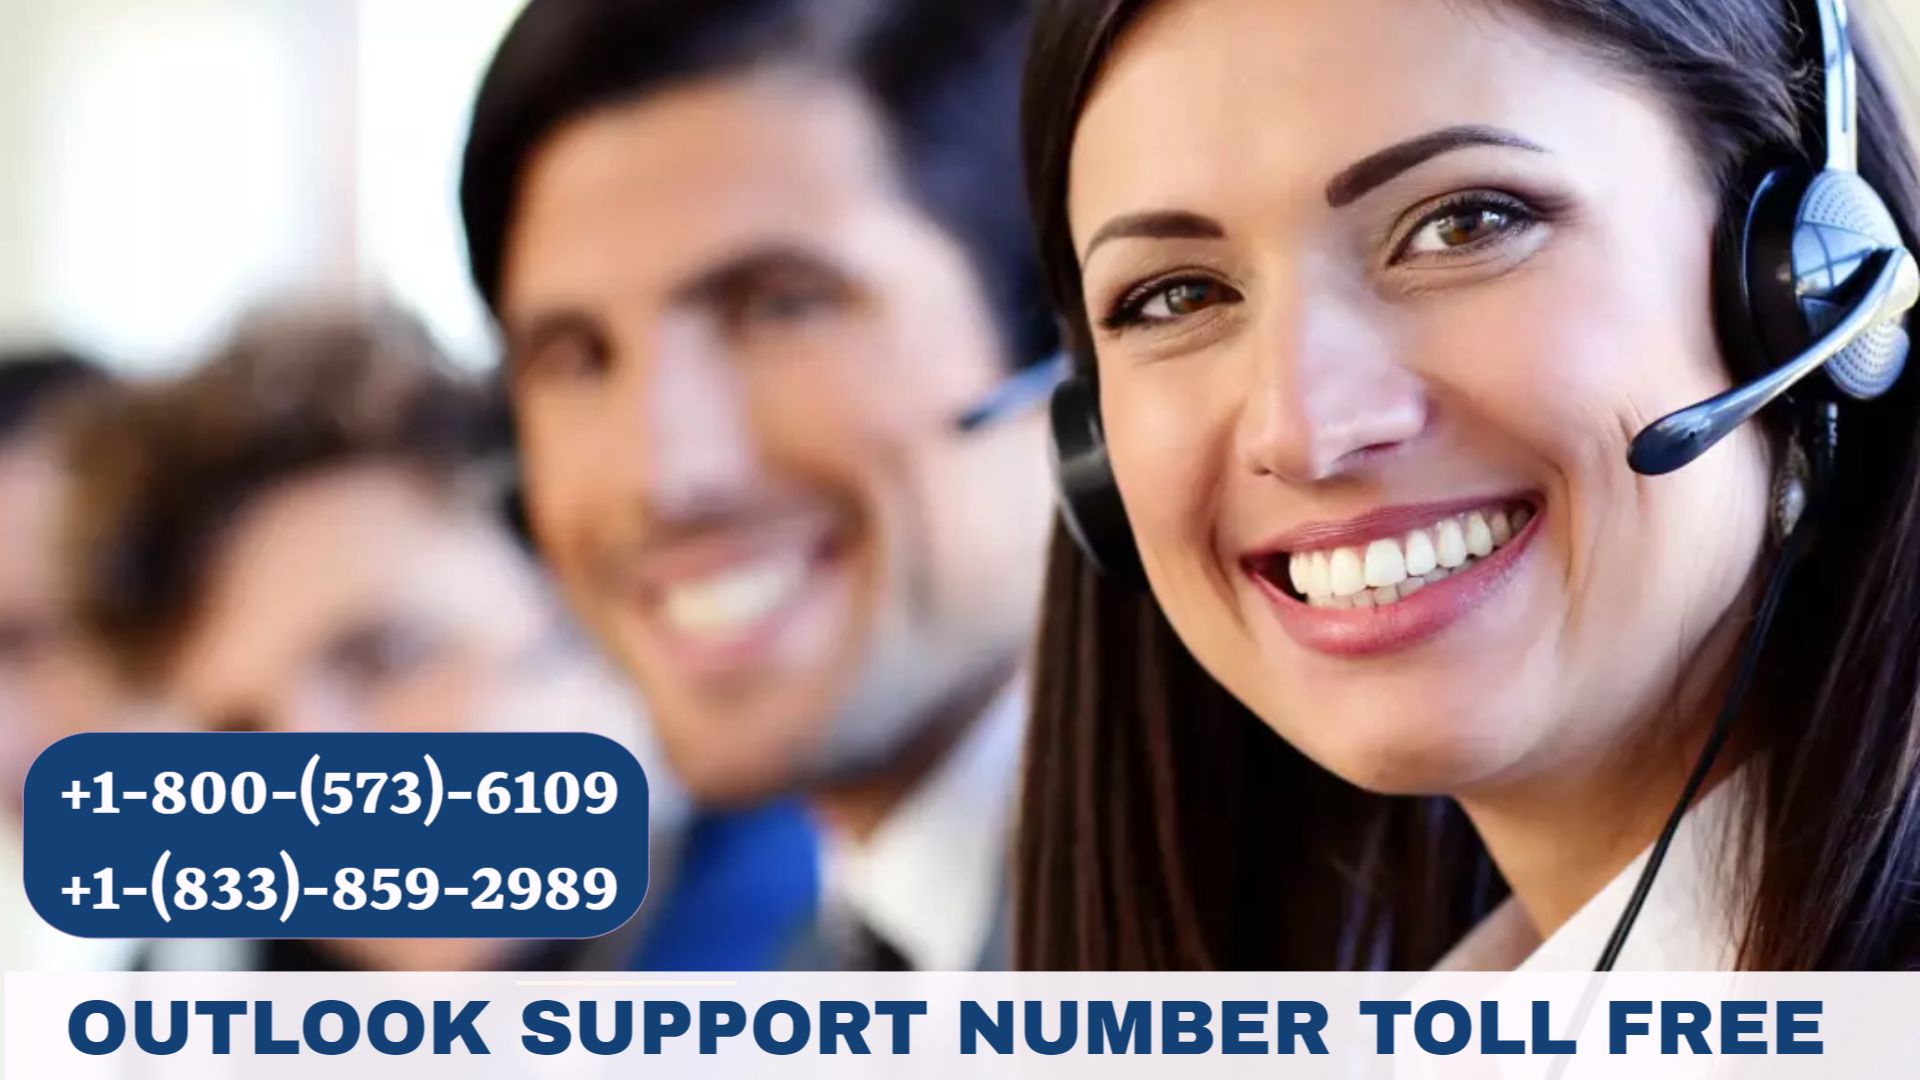 Outlook Service Number -1-833-859-2989